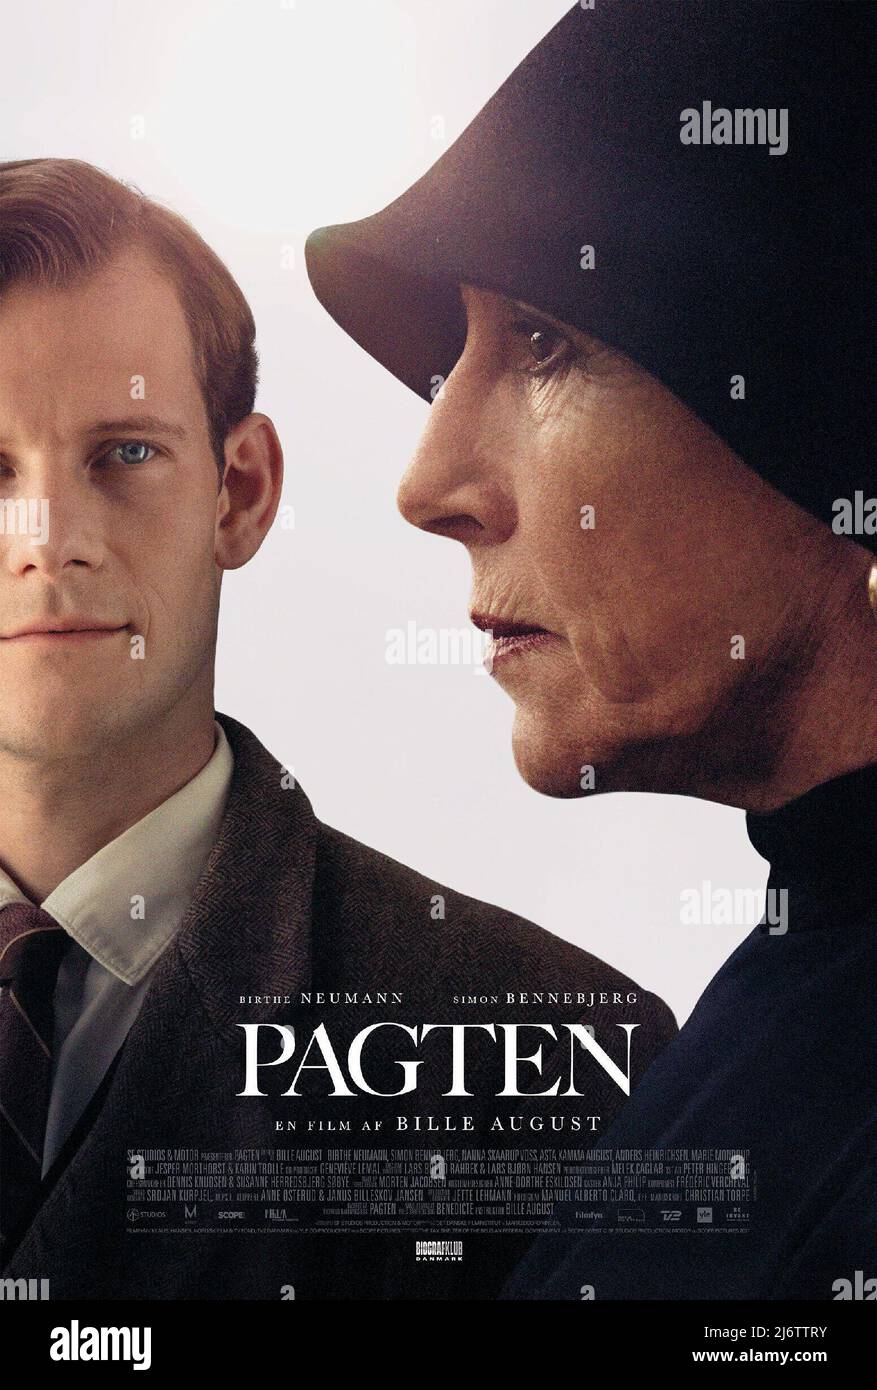 SIMON BENNEBJERG and BIRTHE NEUMANN in THE PACT (2021) -Original title: PAGTEN-, directed by BILLE AUGUST. Credit: SF Studios / Album Stock Photo